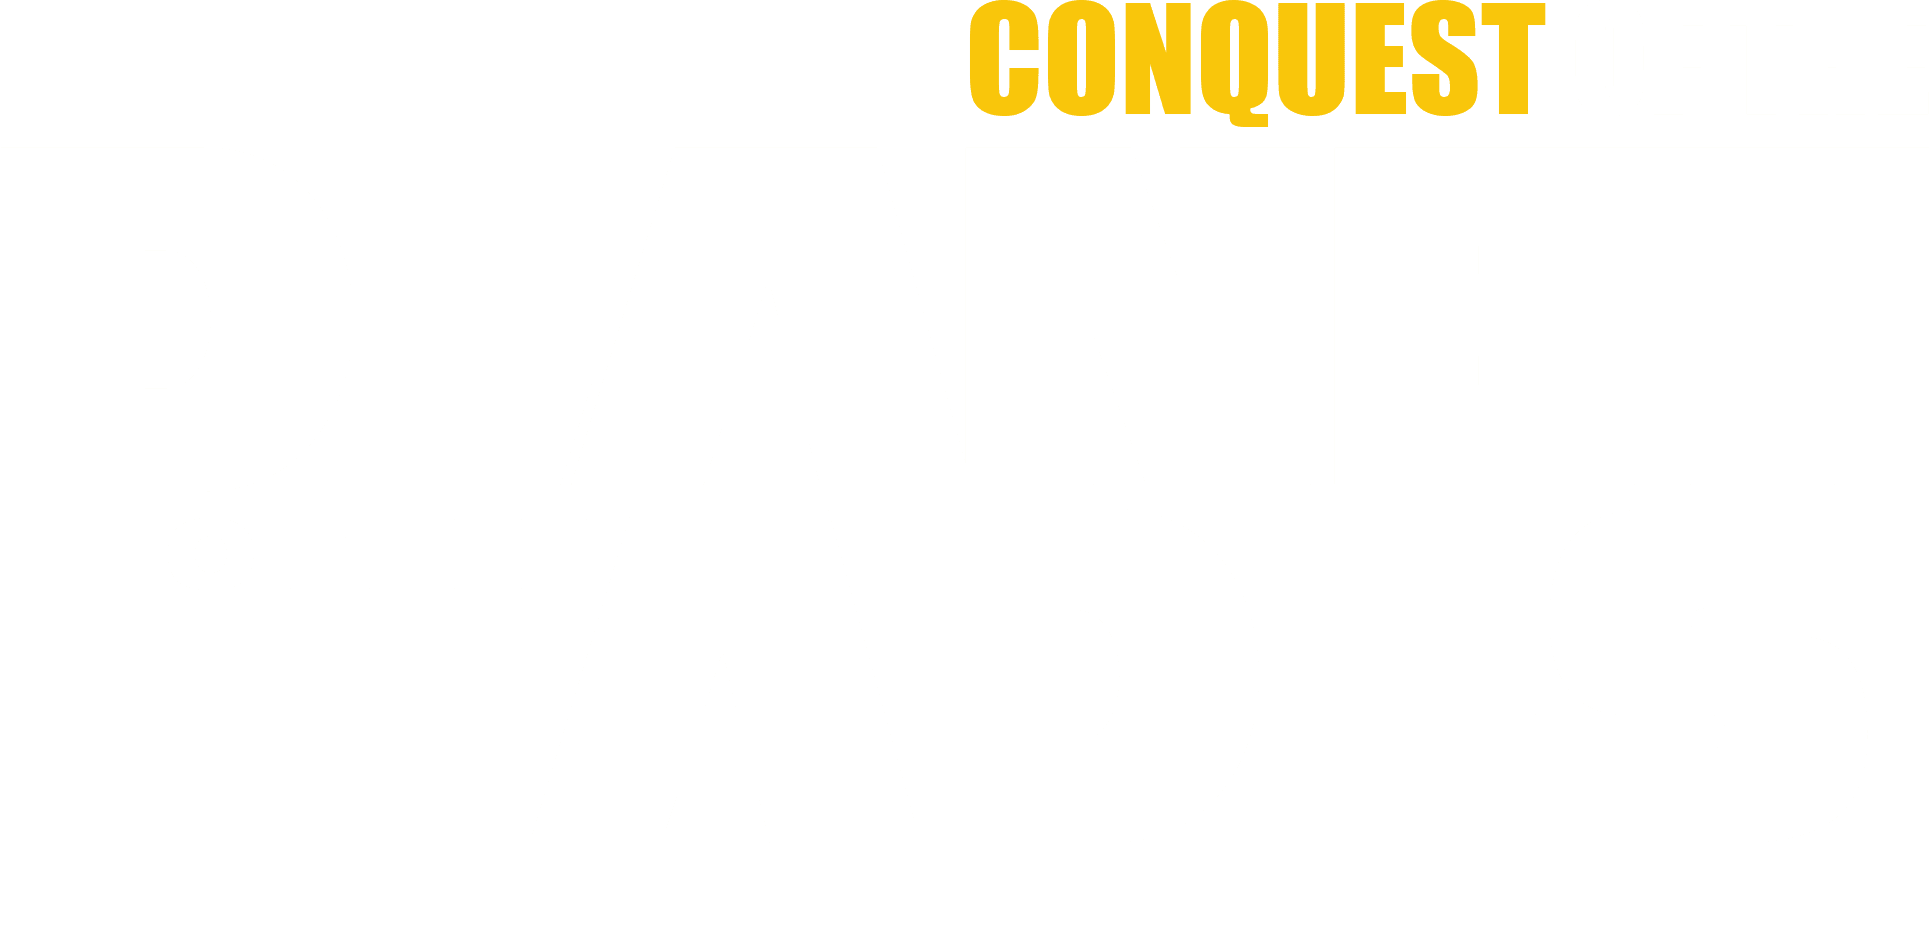 Conquest of the Planet of the Apes logo